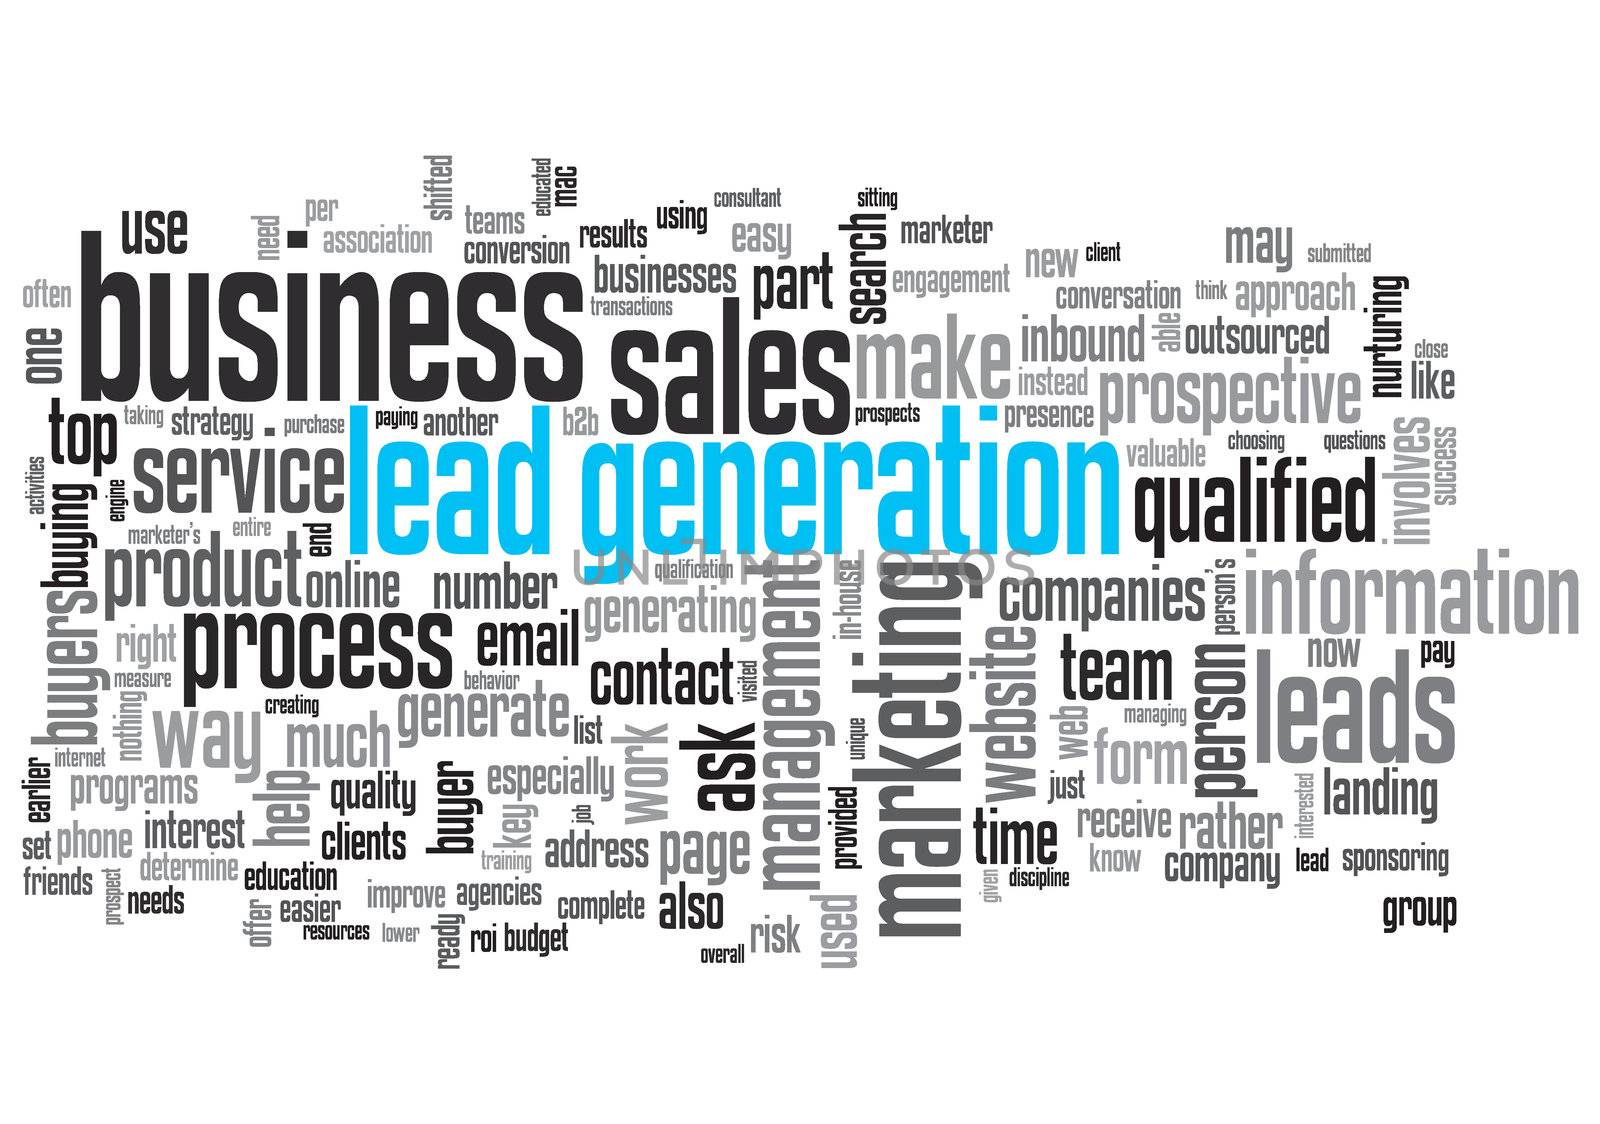 Lead Generation Concept Design Word Cloud on White Background by rgbpepper